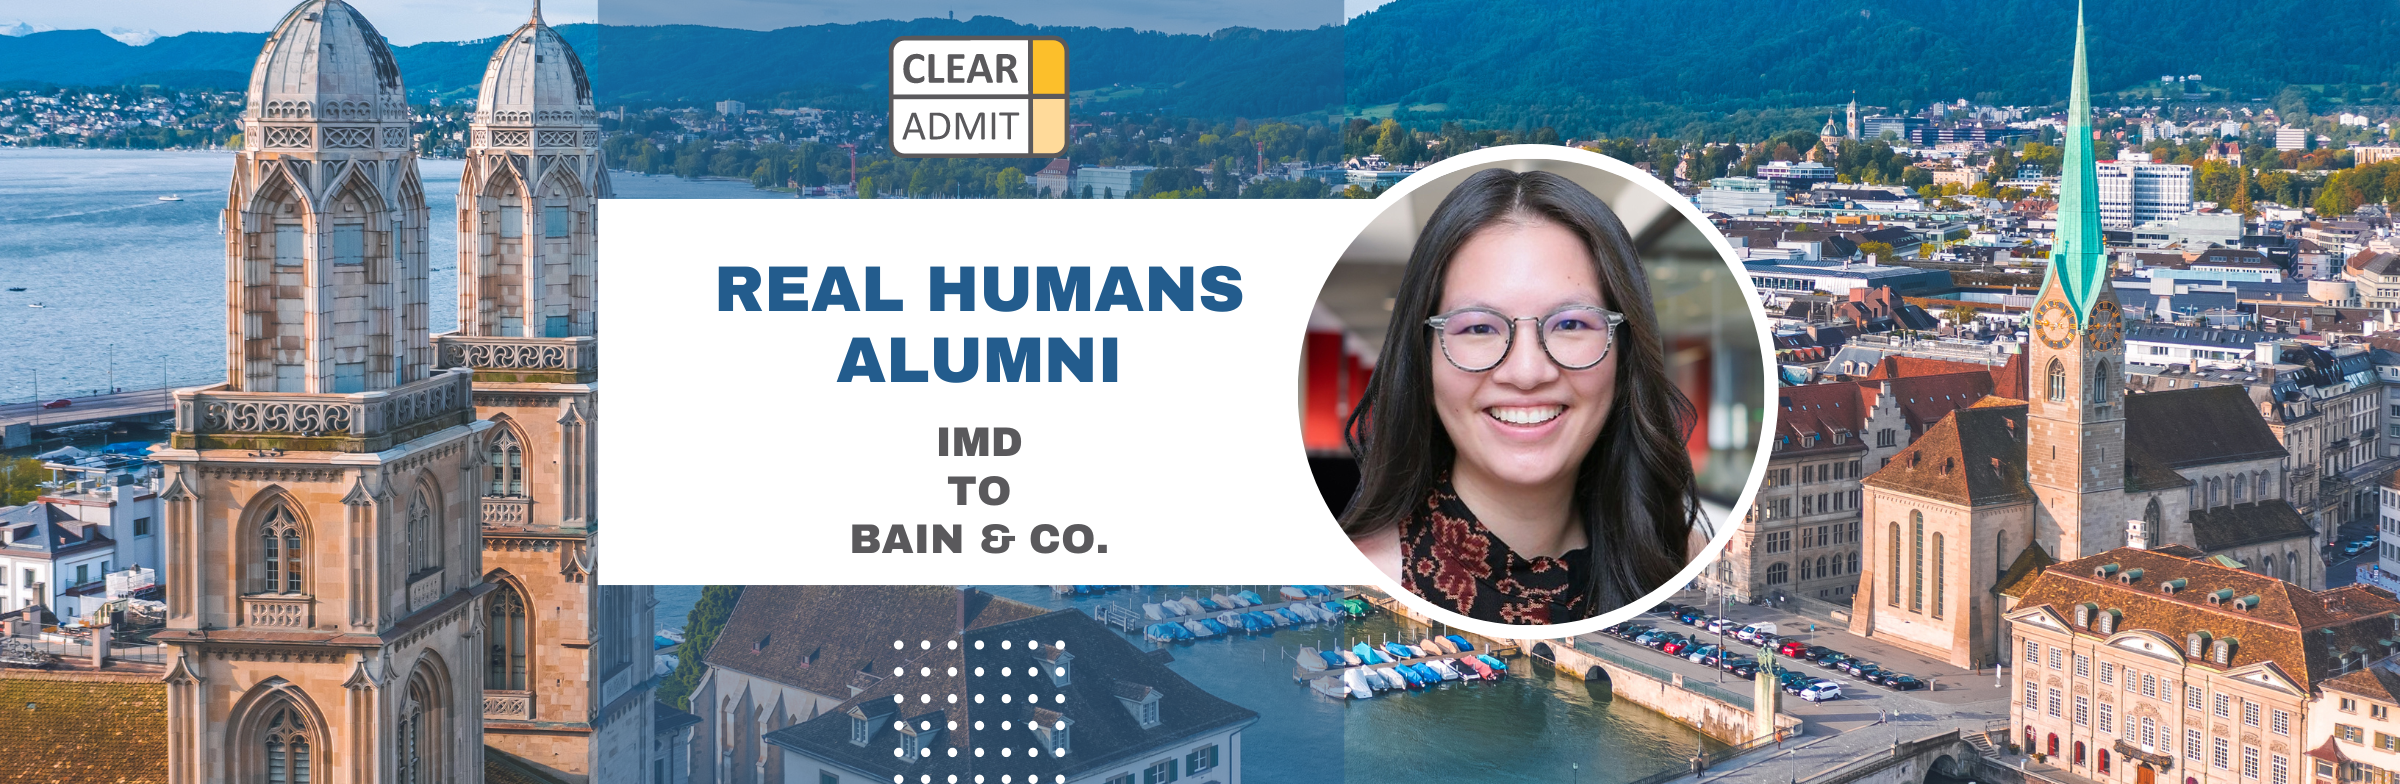 Image for Real Humans of Bain & Co.: Amanda Tan, IMD MBA ’22, Consultant